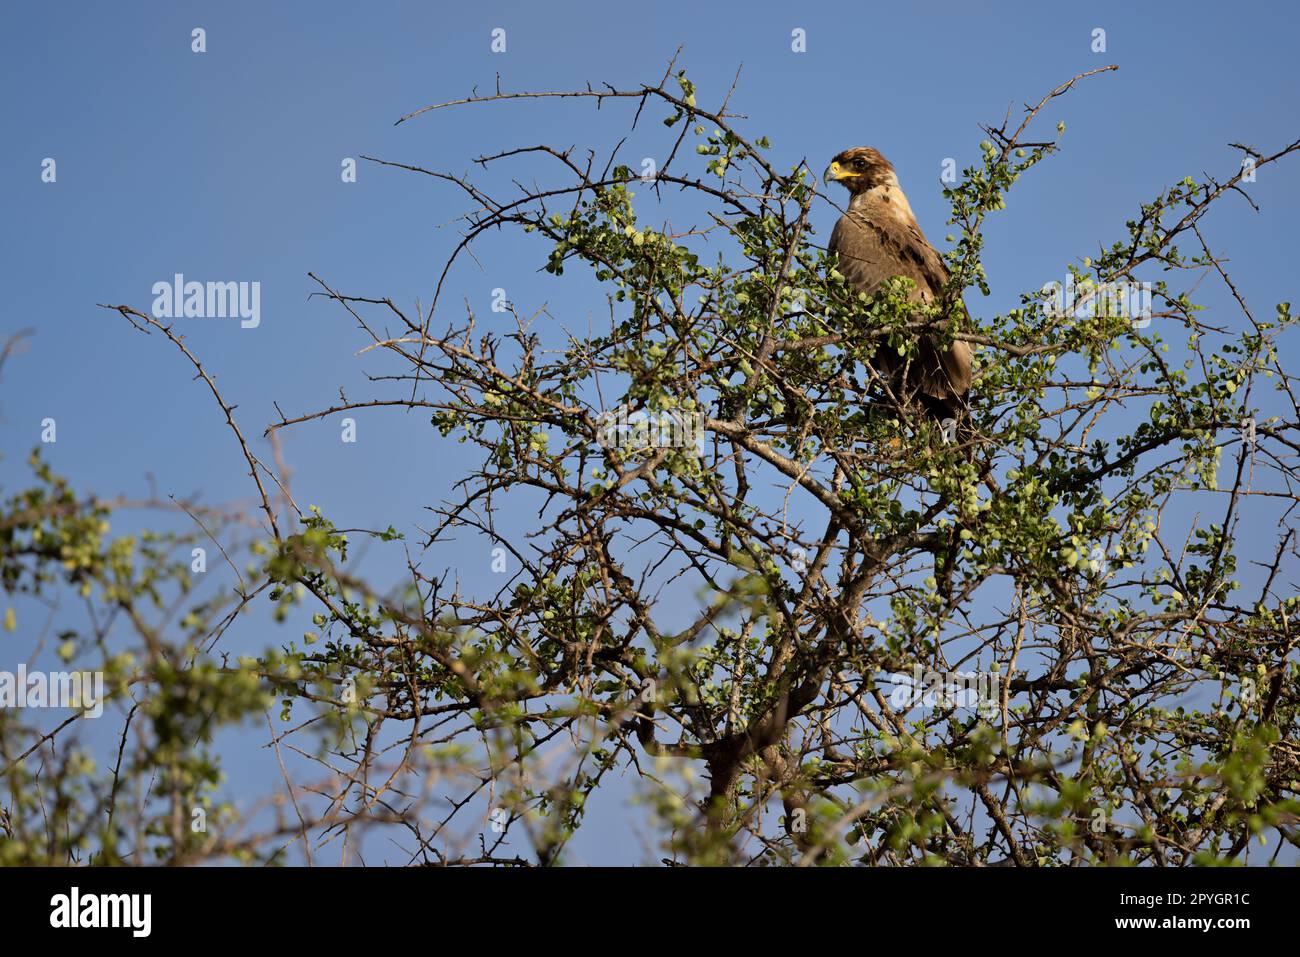 A majestic Tawny Eagle is captured perched on the top of a tree, its sharp eyes scanning the vast savannah of the Kenyan Tsavo East reserve. The blue Stock Photo